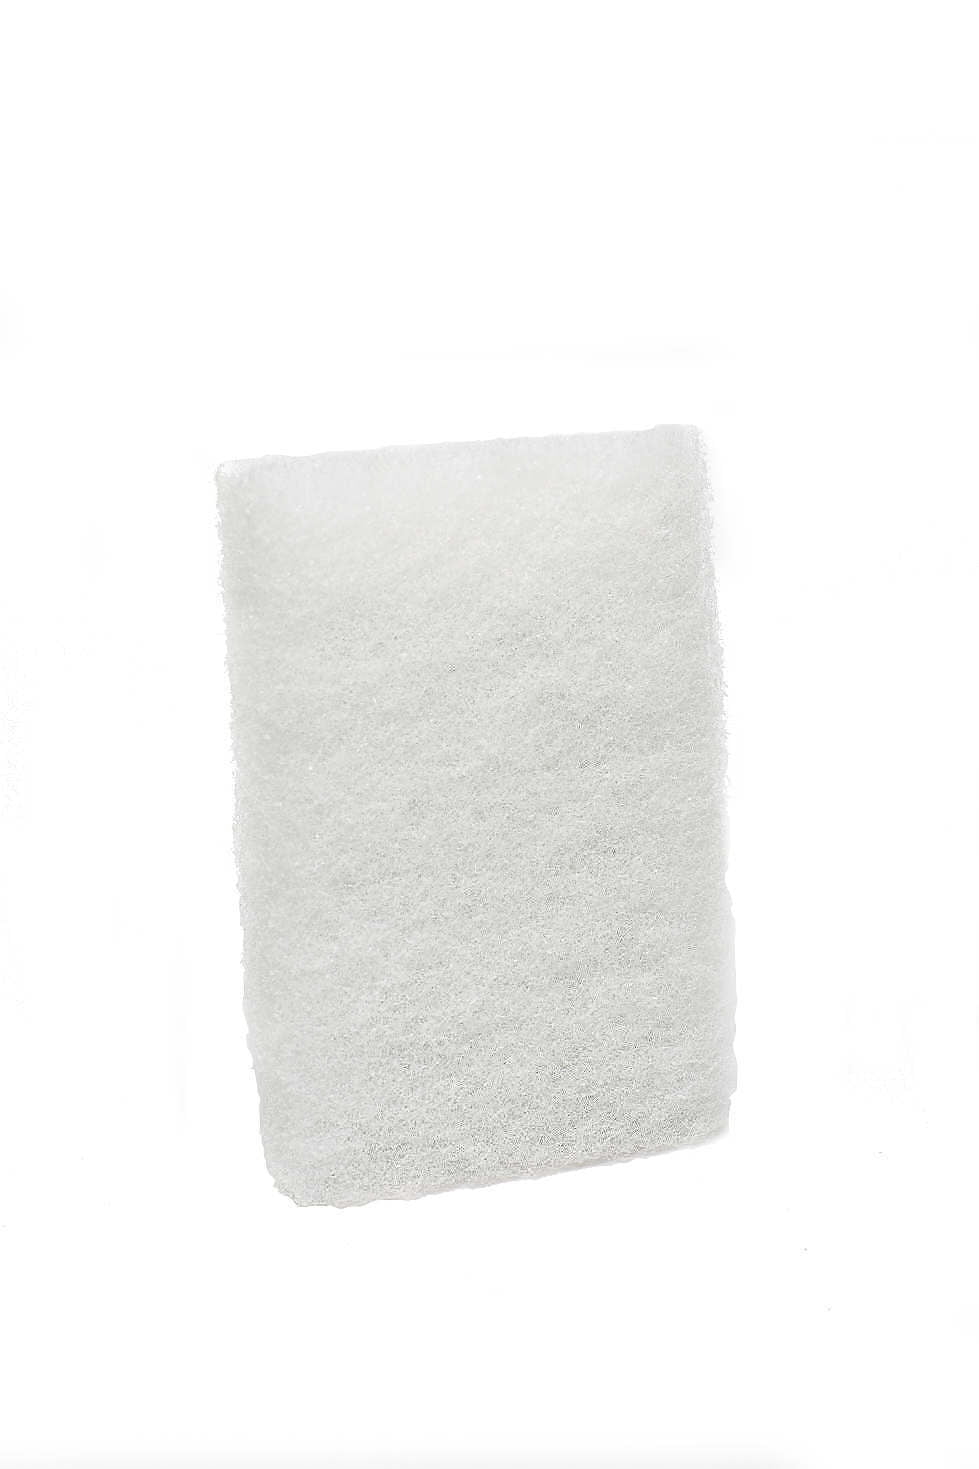 Shower Cleaning Pads | Surface Protect